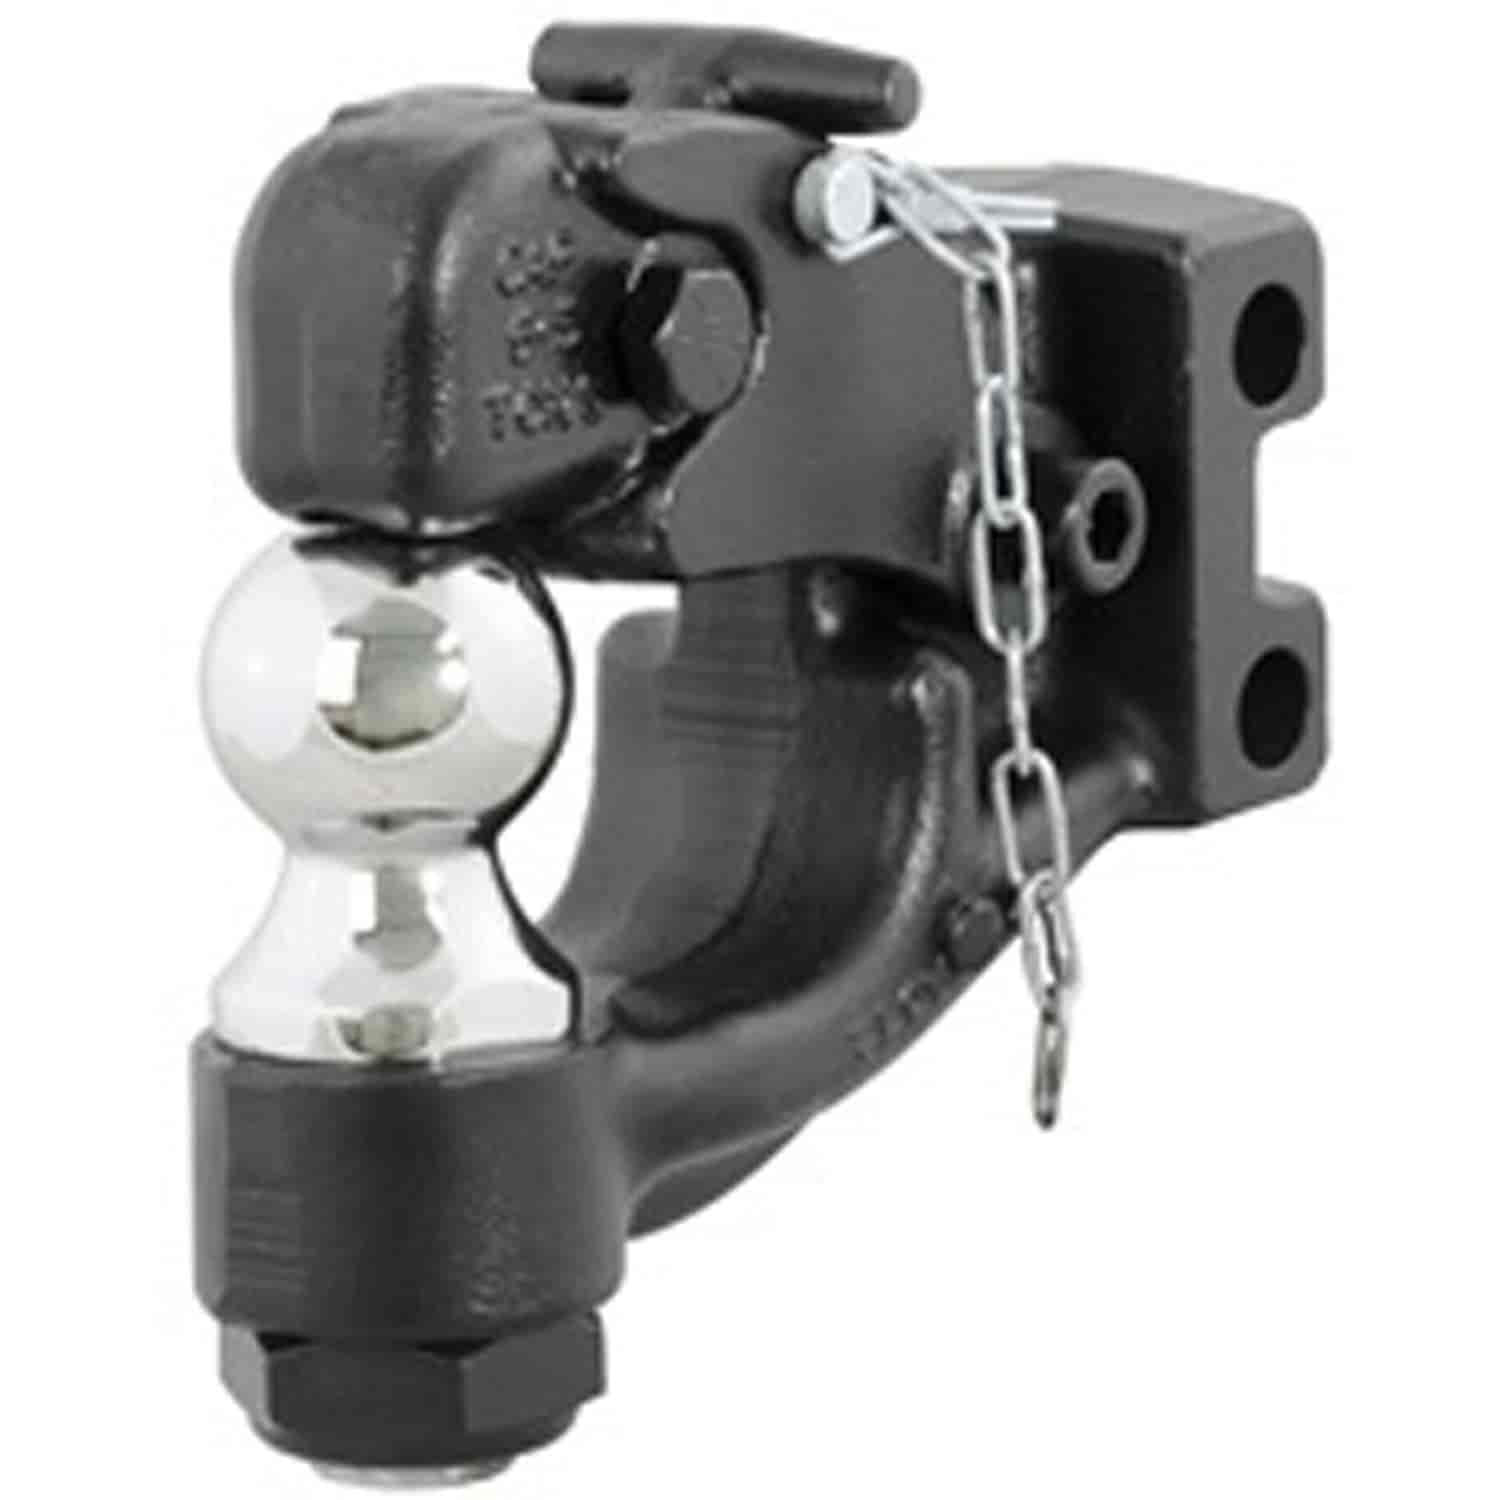 2 BALL PINTLE FOR USE WITH CURT ADJUST CHANNEL STYLE BALL MOUNTS